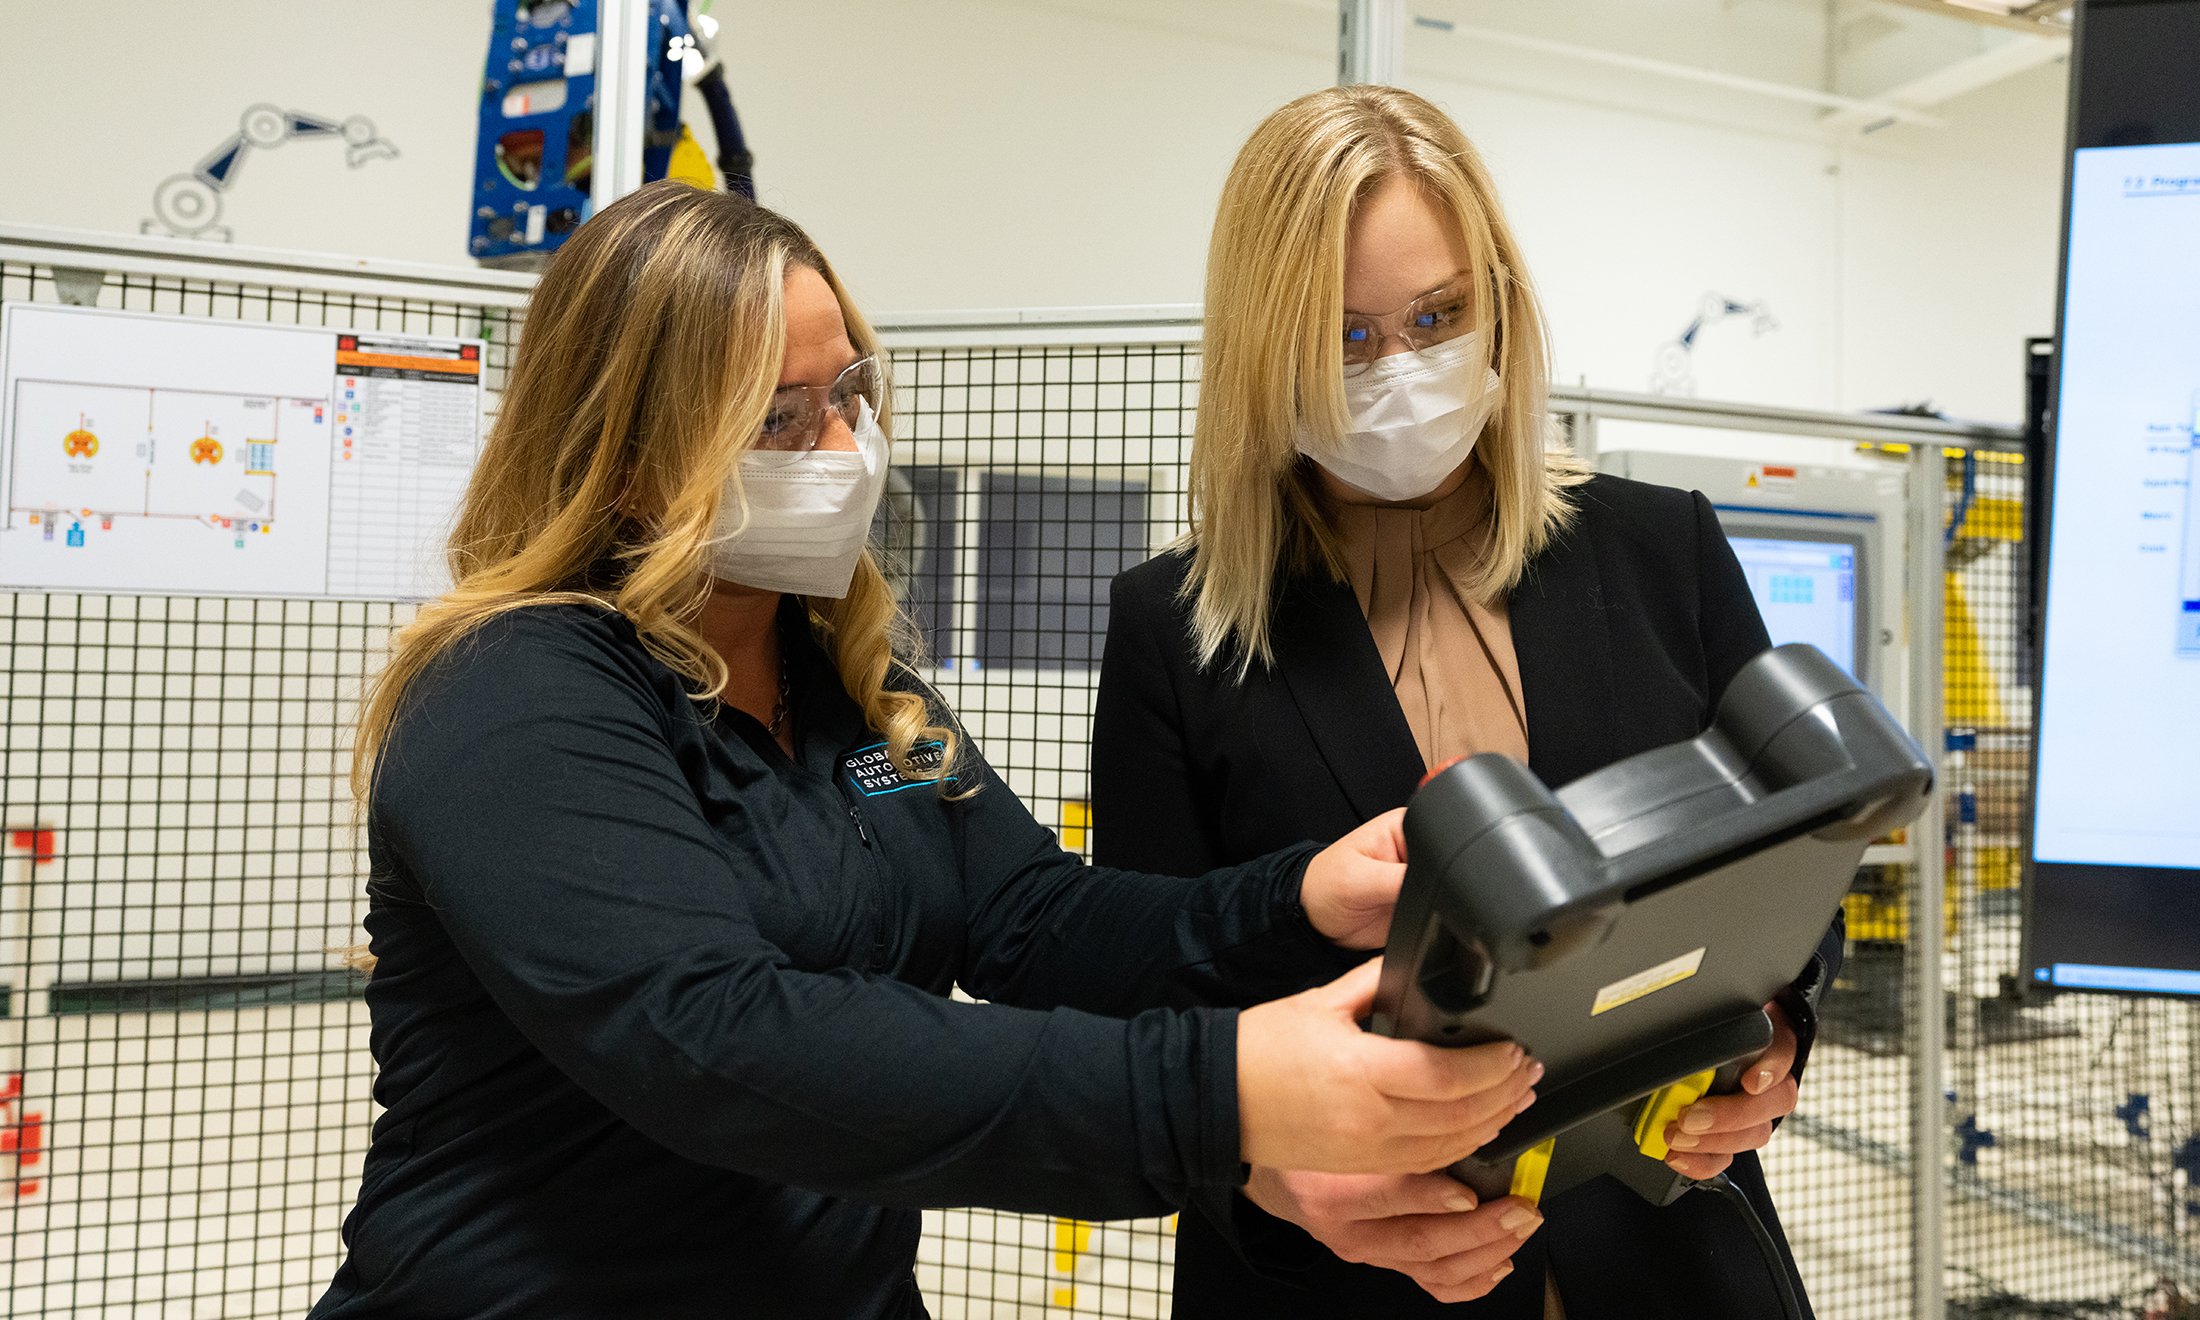 Woman showing another woman industrial hygiene equipment